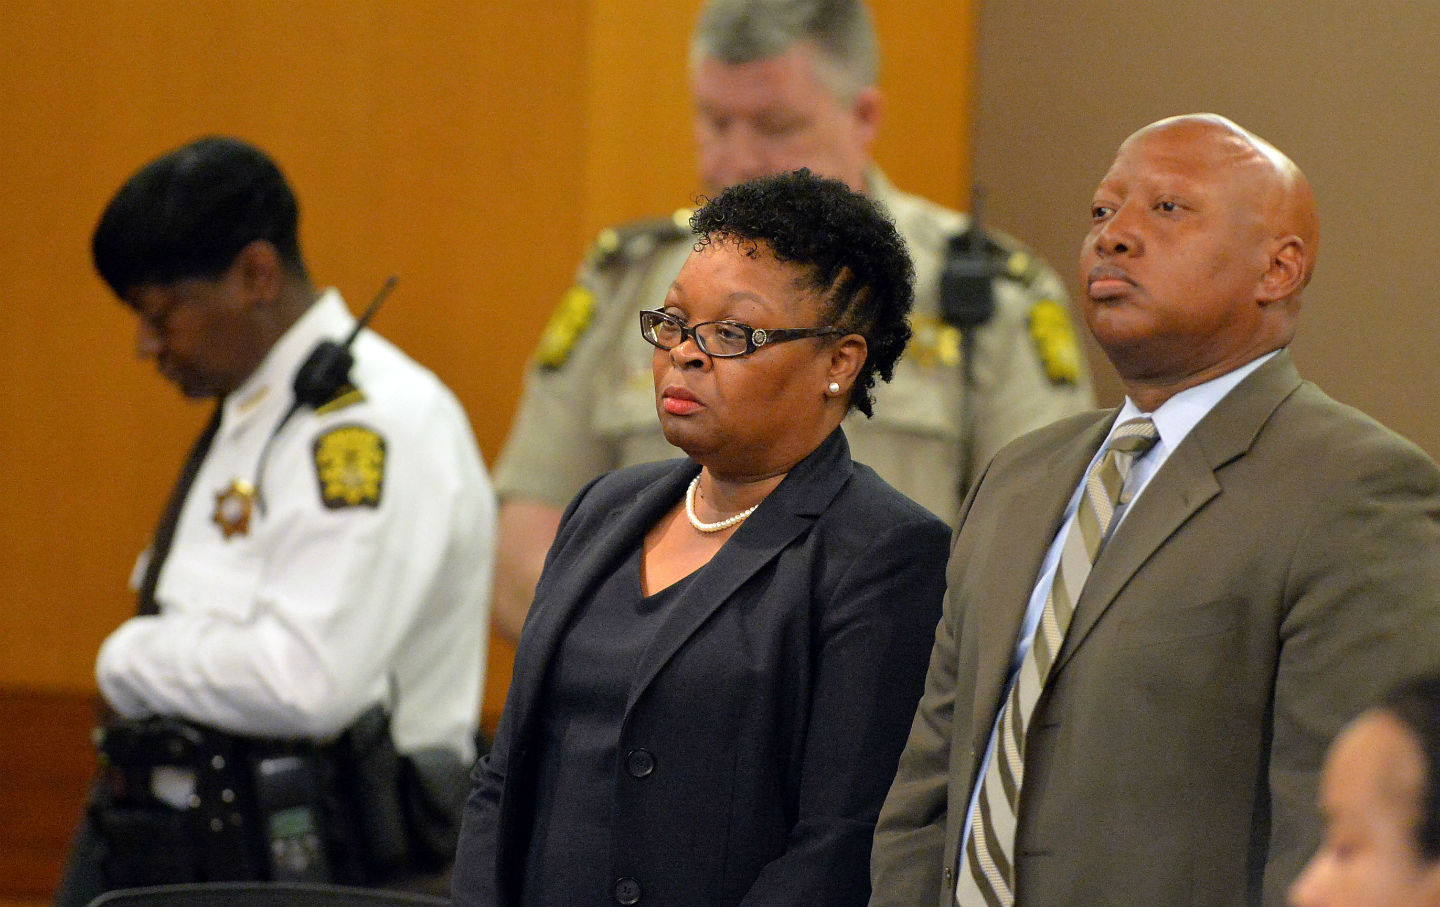 Why Were Atlanta Teachers Prosecuted Under a Law Meant for Organized Crime?